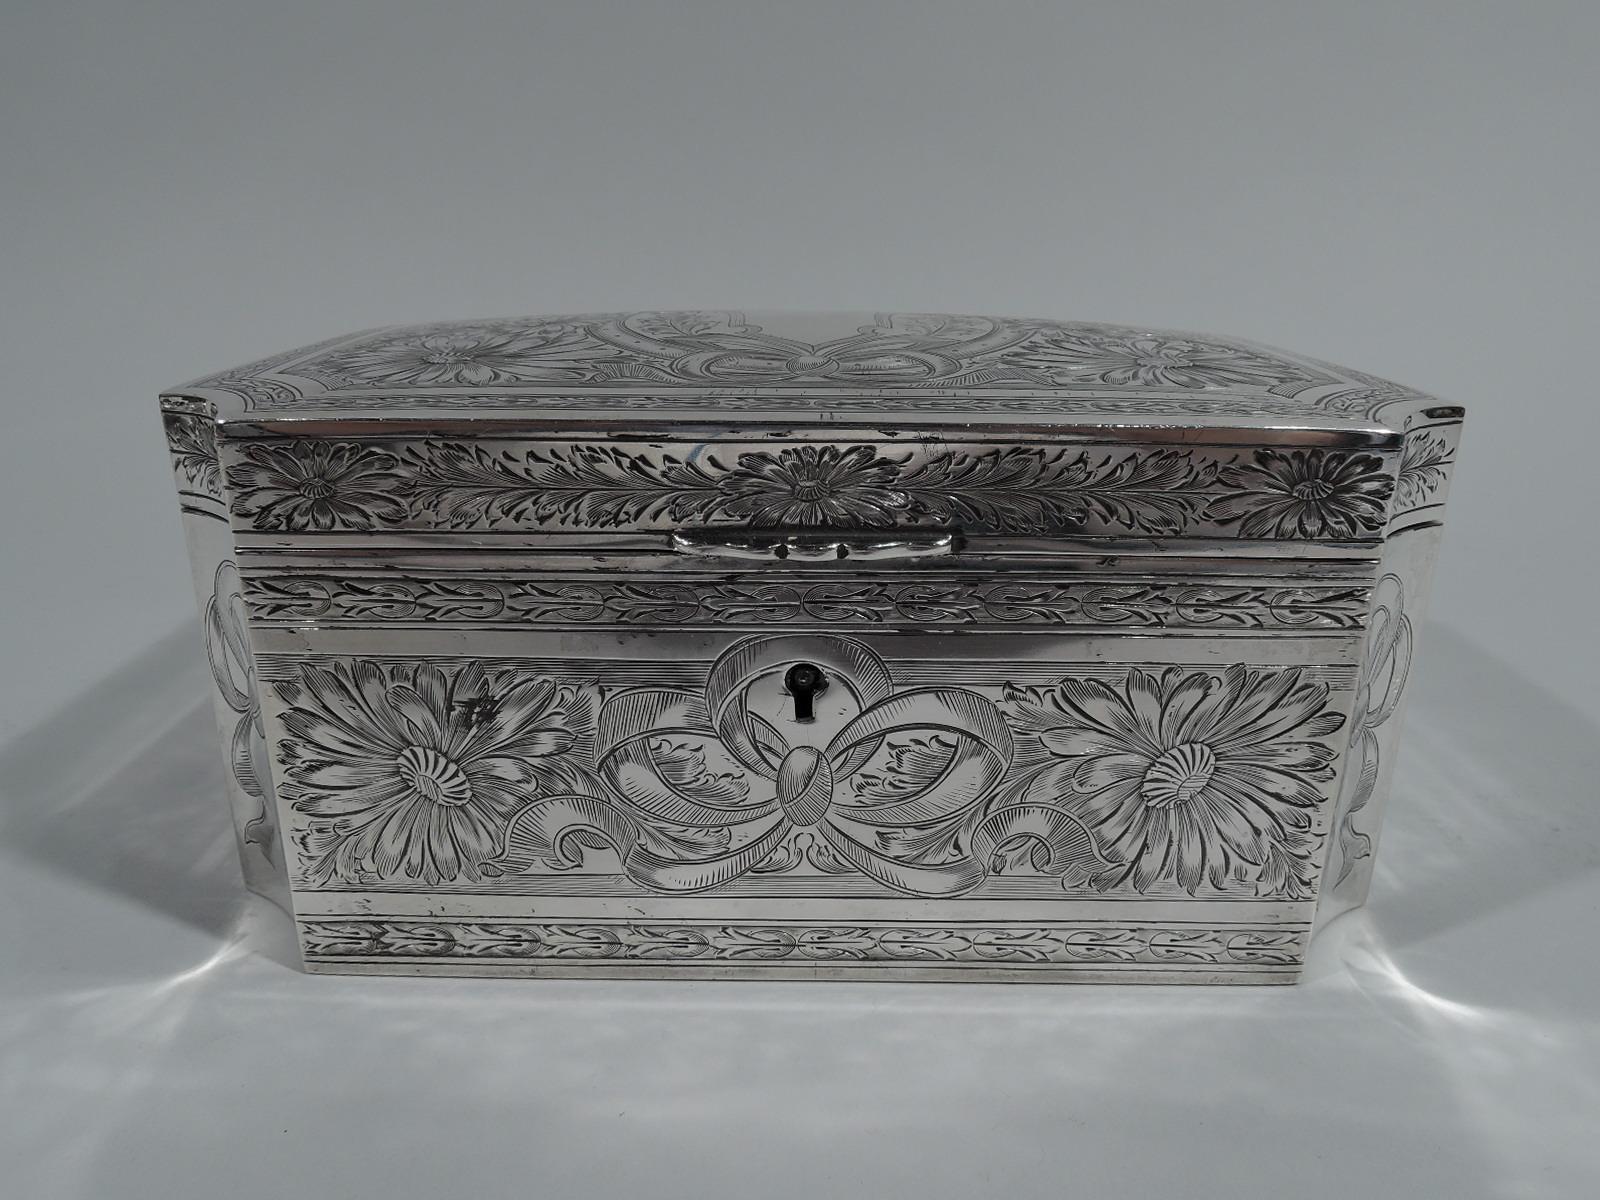 Pretty Art Nouveau sterling silver jewelry box. Made by Gorham in Providence in 1911. Rectangular with straight sides and concave corners. Cover hinged and gently curved. Dense and bold ornament in form of flowers, leaves, and bows engraved on sides